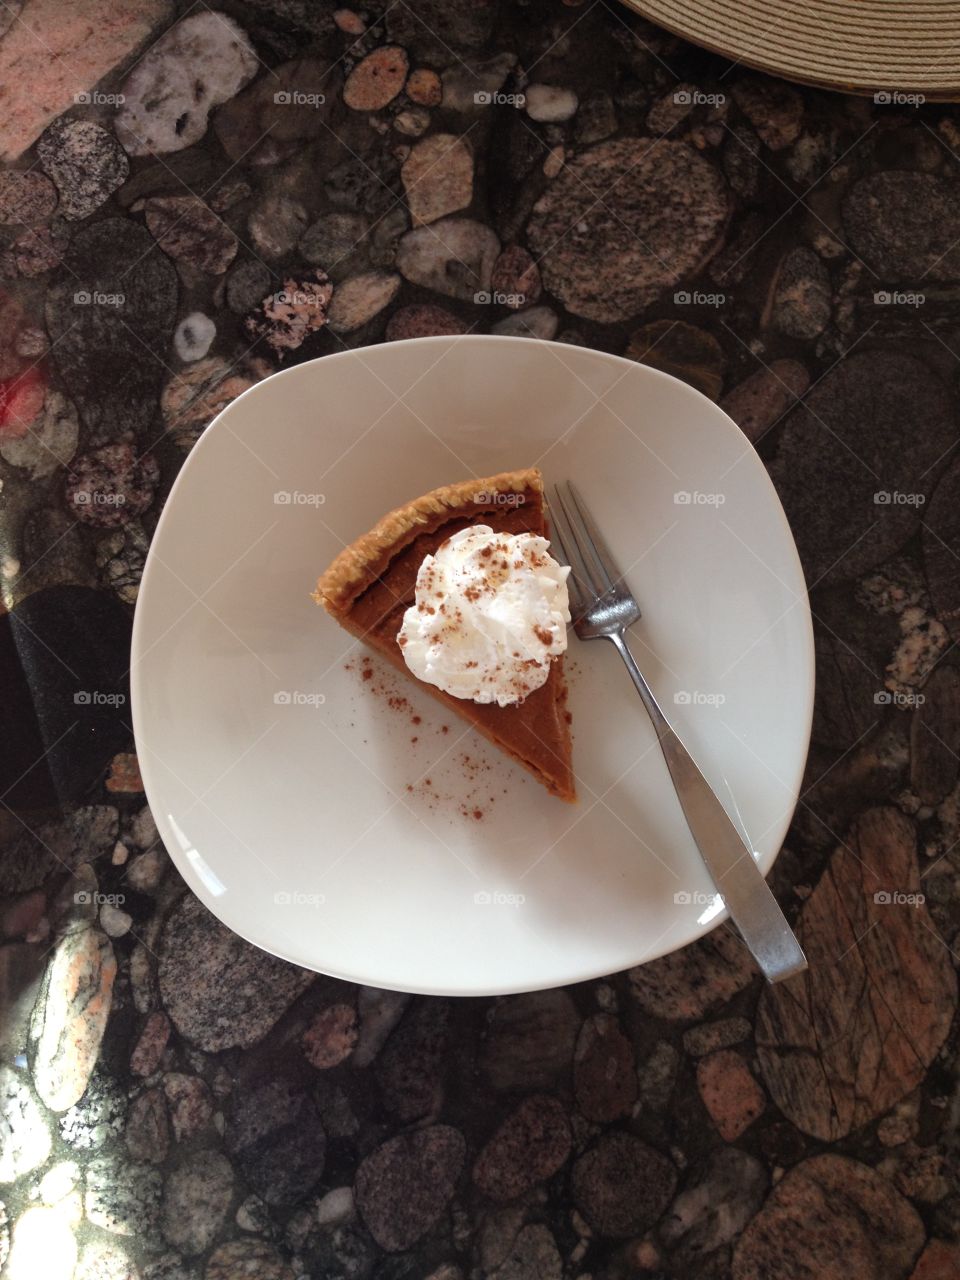 Homemade pumpkin pie, whipped cream from a can, cinnamon dusted over. Unfiltered/edited picture. 